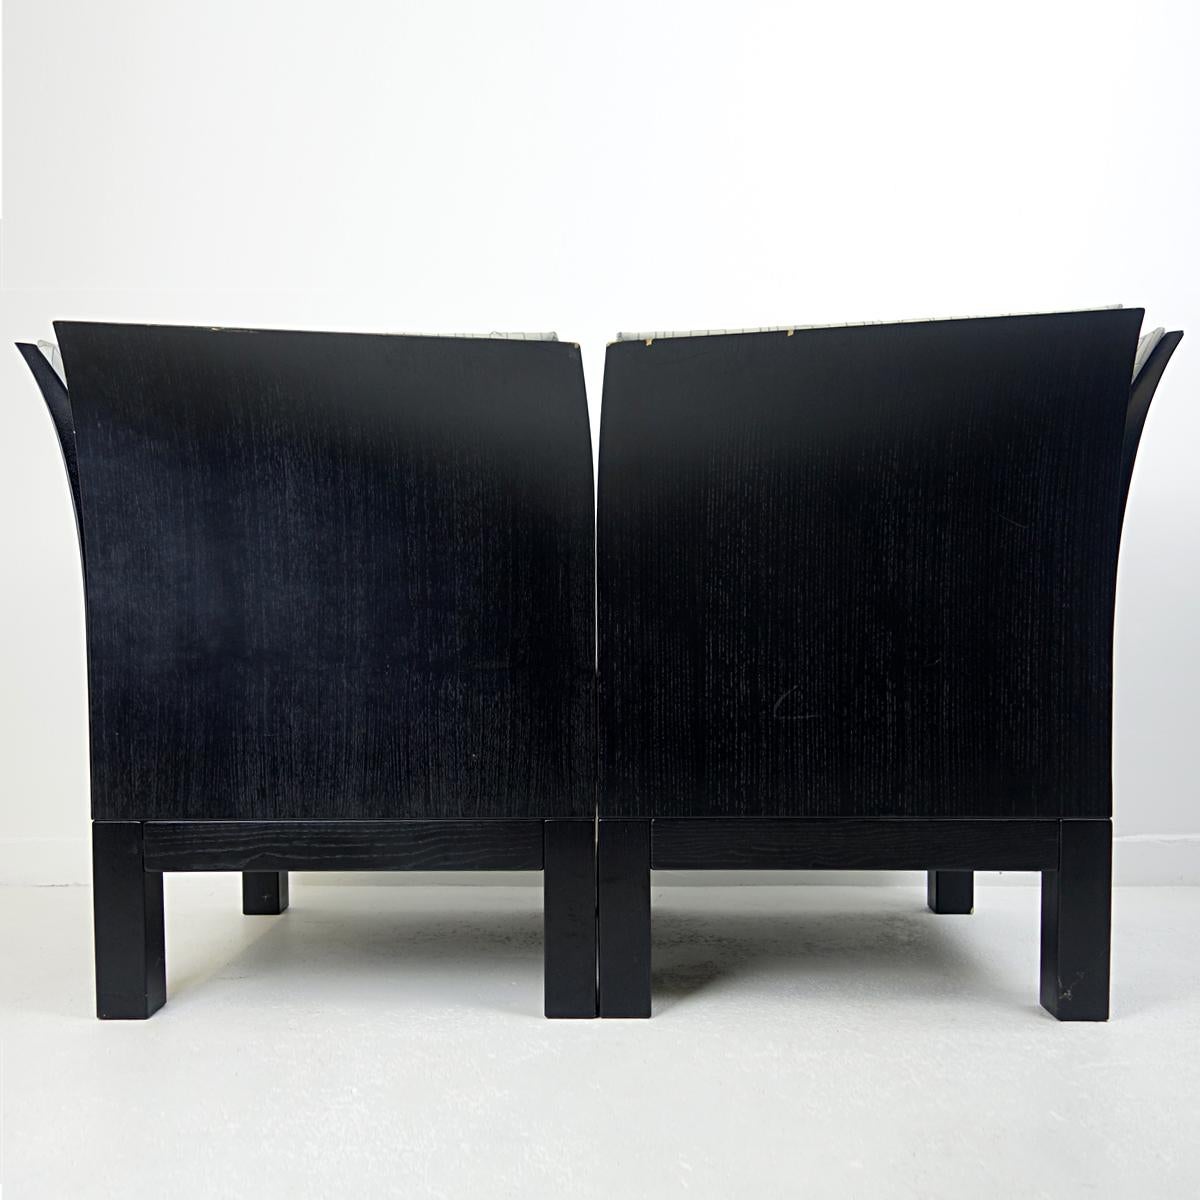 Late 20th Century Pair of Postmodern Wooden Easy Chairs or Bench with Graphic Fabric by Thonet